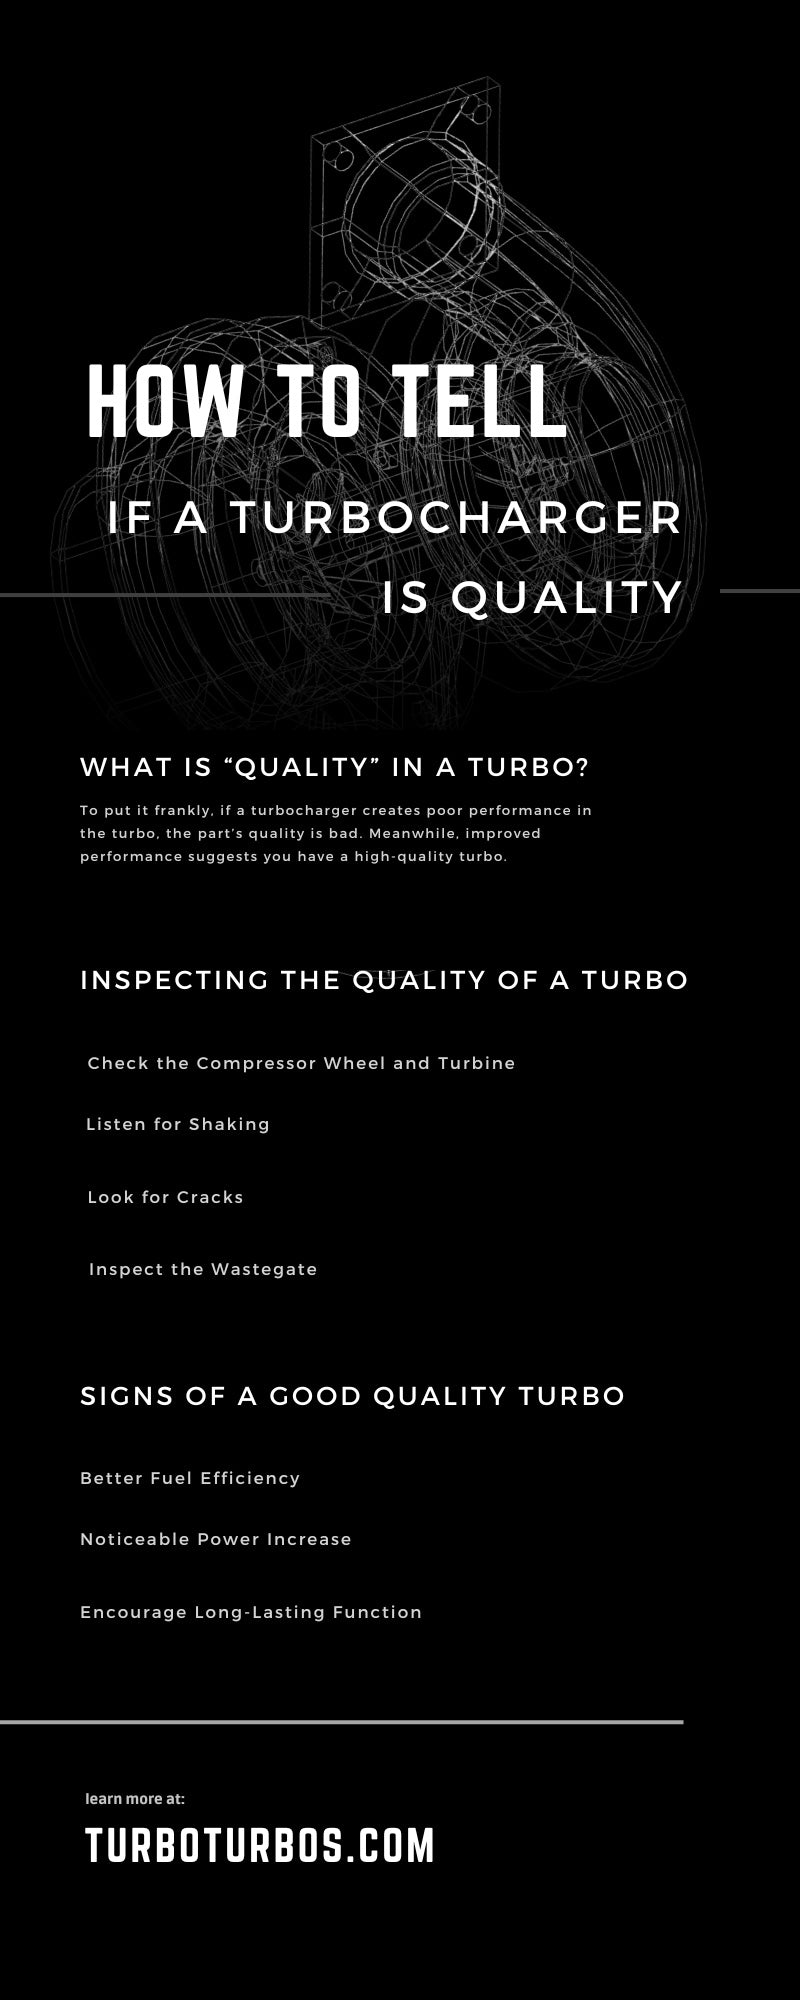 How To Tell if a Turbocharger Is Quality